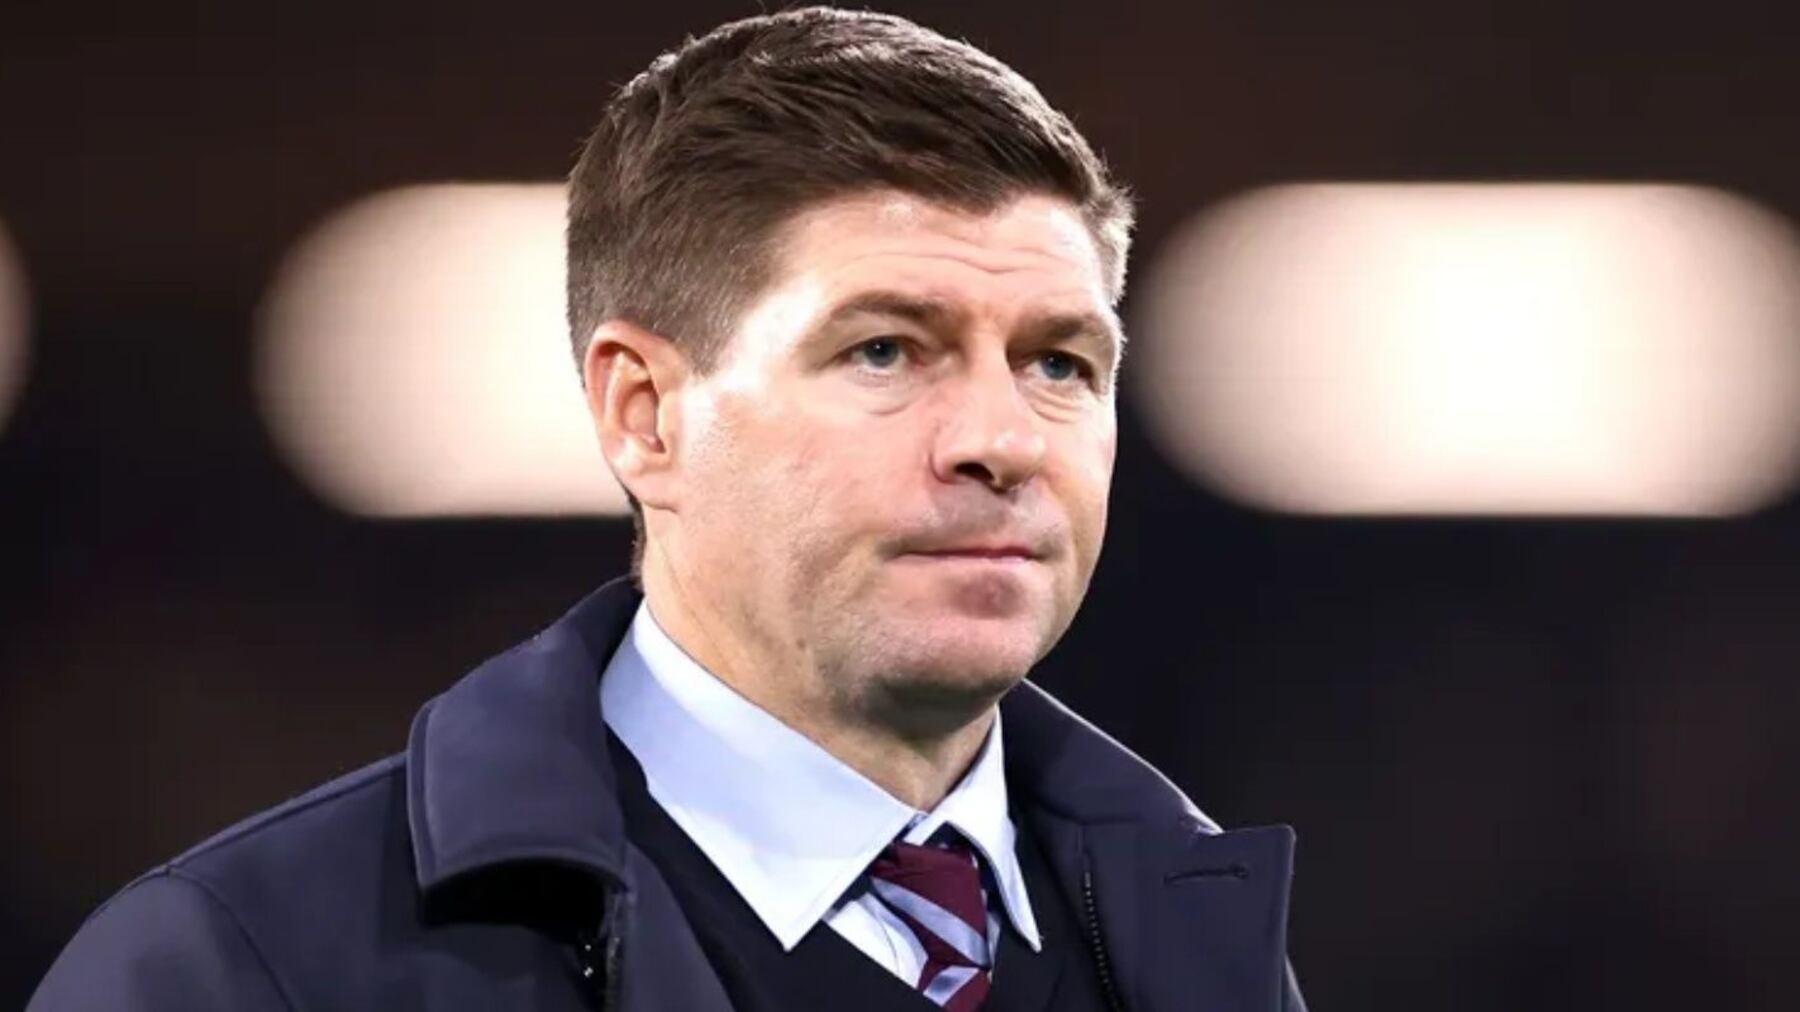 He failed at Aston Villa and accepts his place, this is what Gerrard says about being able to replace Klopp